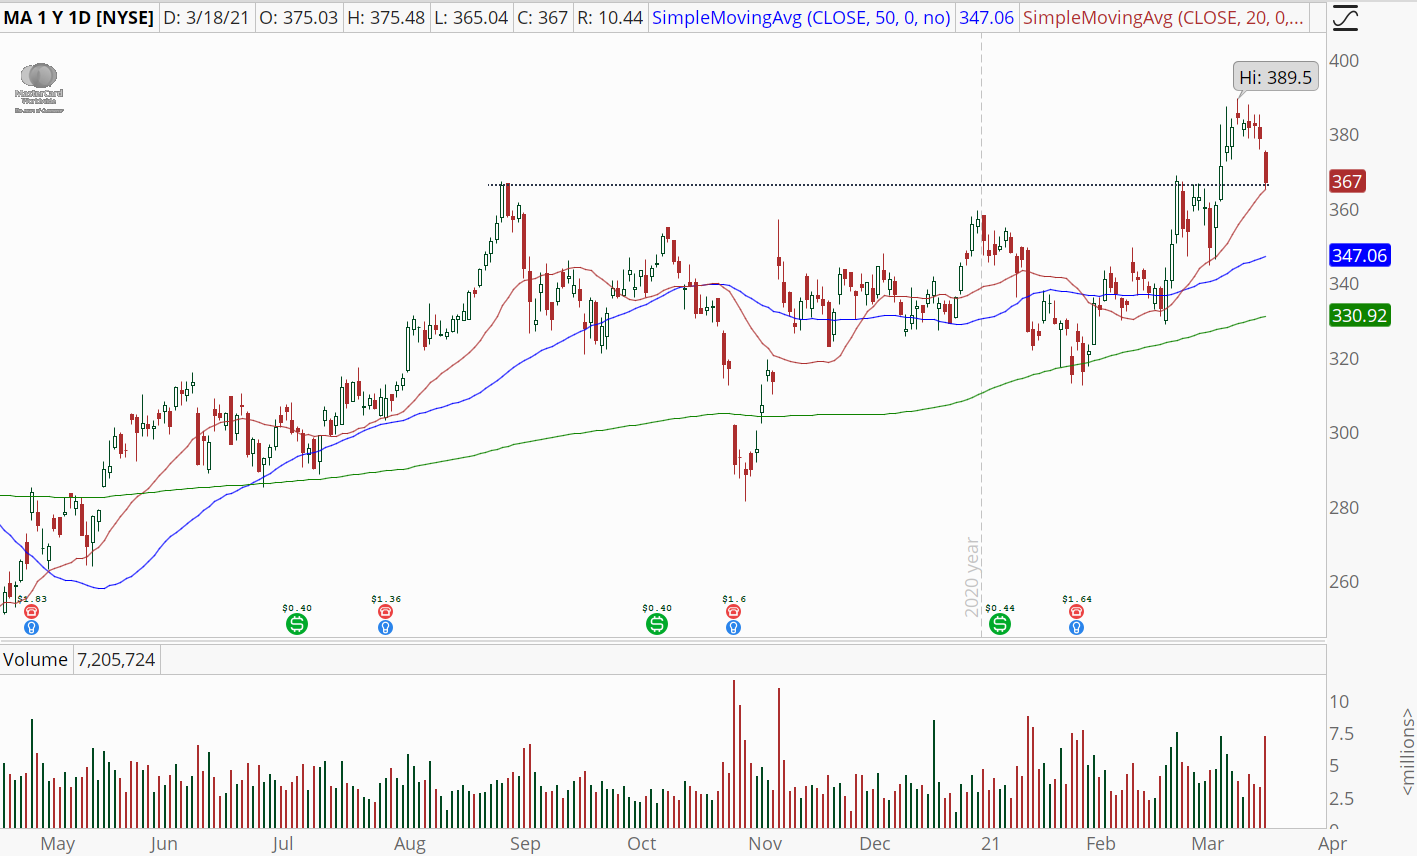 MasterCard (MA) stock with a bull retracement pattern